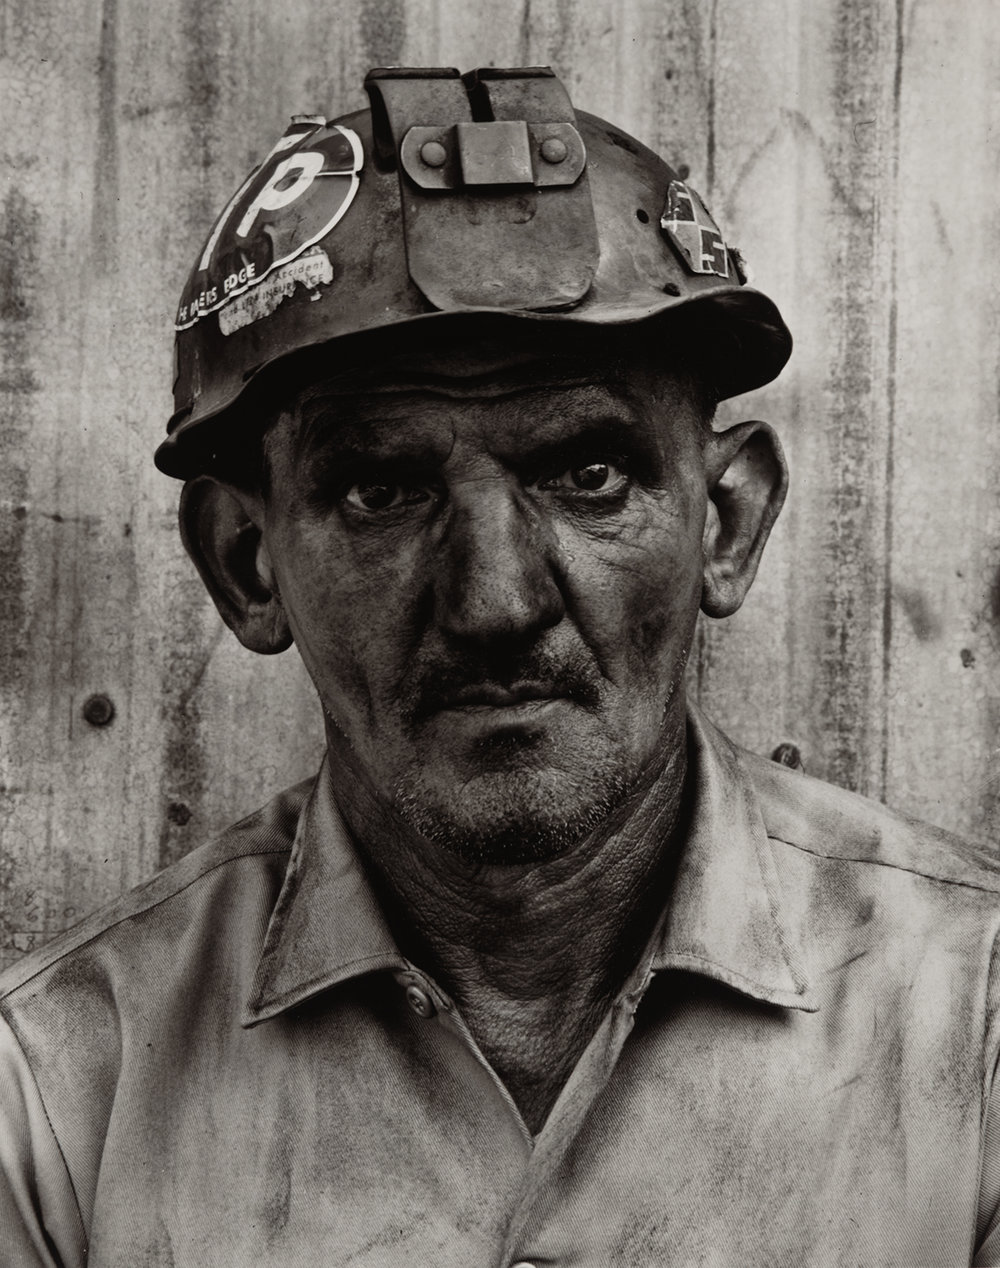   Andrew Kosto , Sycamore Mining Company, Cinderella, Mingo County, West Virginia  Image: 1971/ printed: 2016 Gold-tone Gelatin Silver Print 13 1/4 × 10 1/4 in. (image size) The Do Good Fund, Inc., 2016-107 